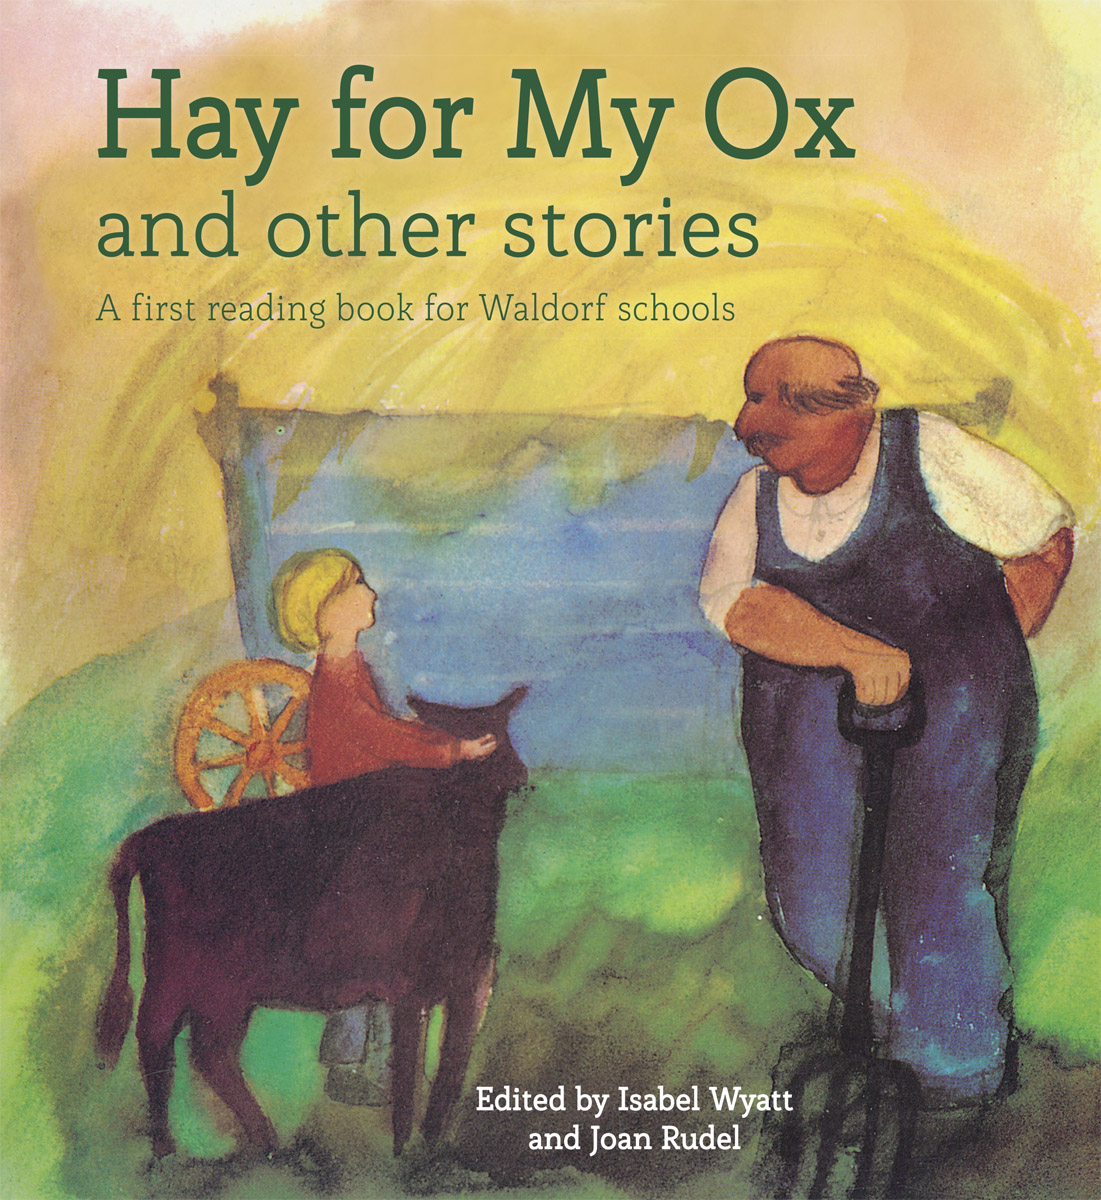 Isabel Wyatt, Hay for my Ox cover image